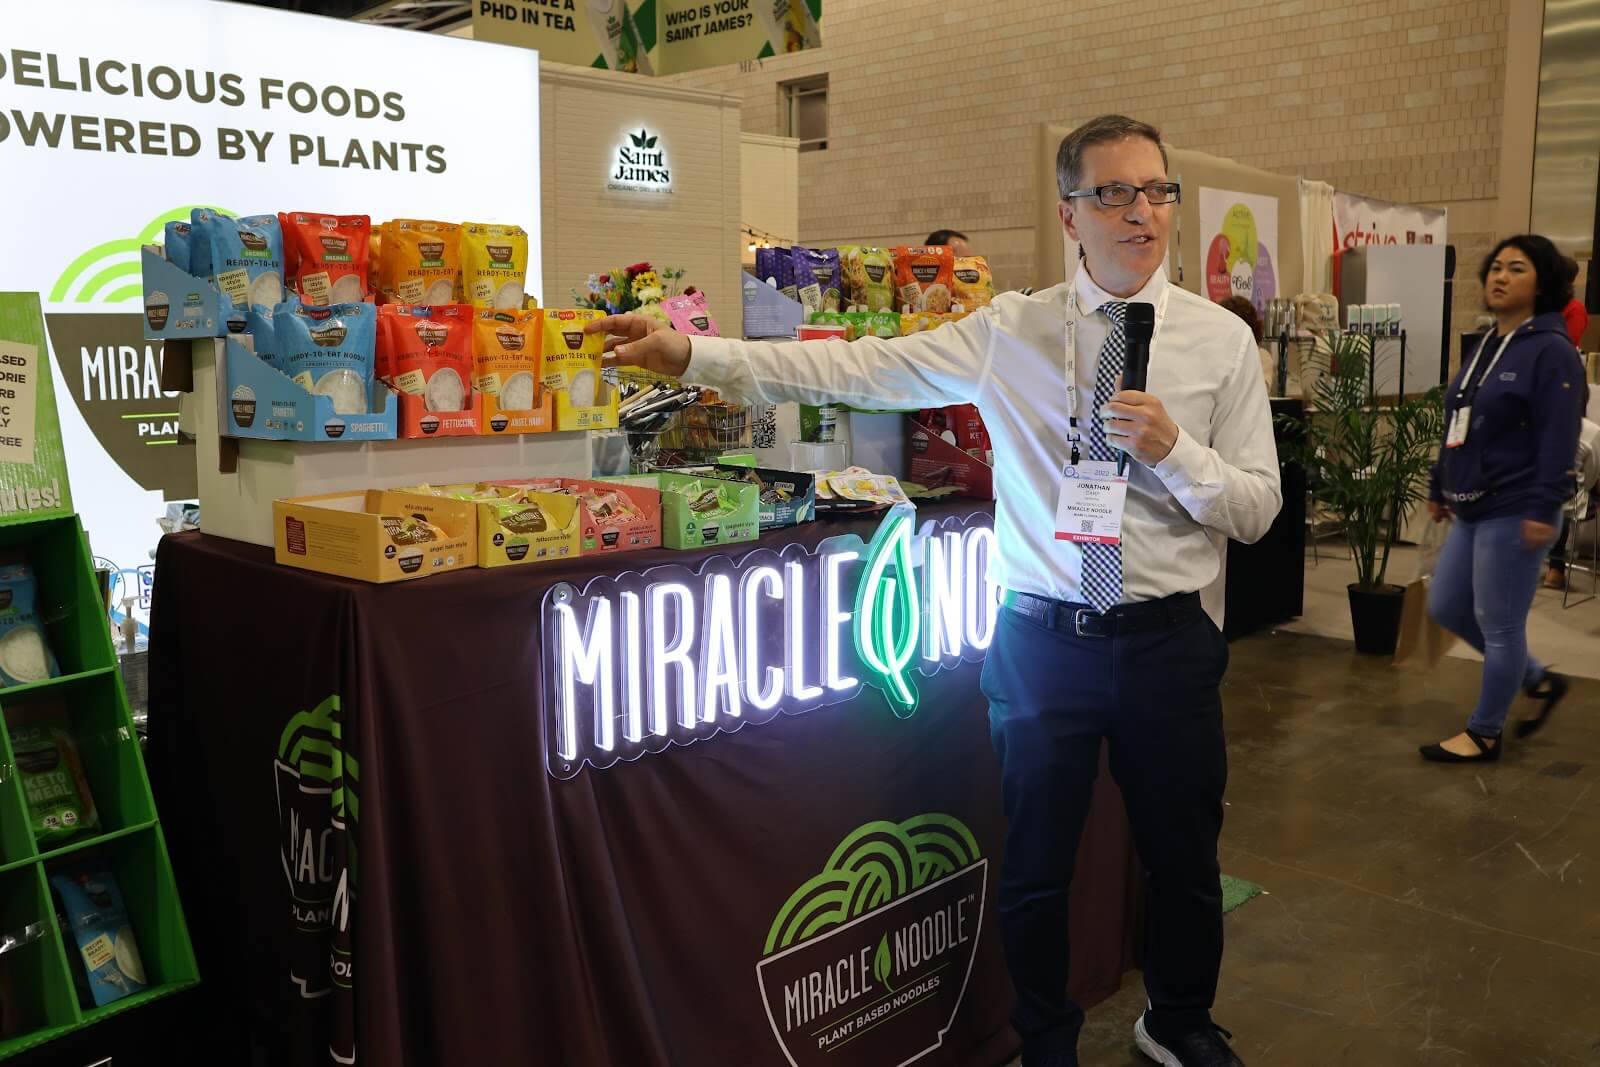 Dr. Jonathan Carp and Miracle Noodle samples at expo east 2022